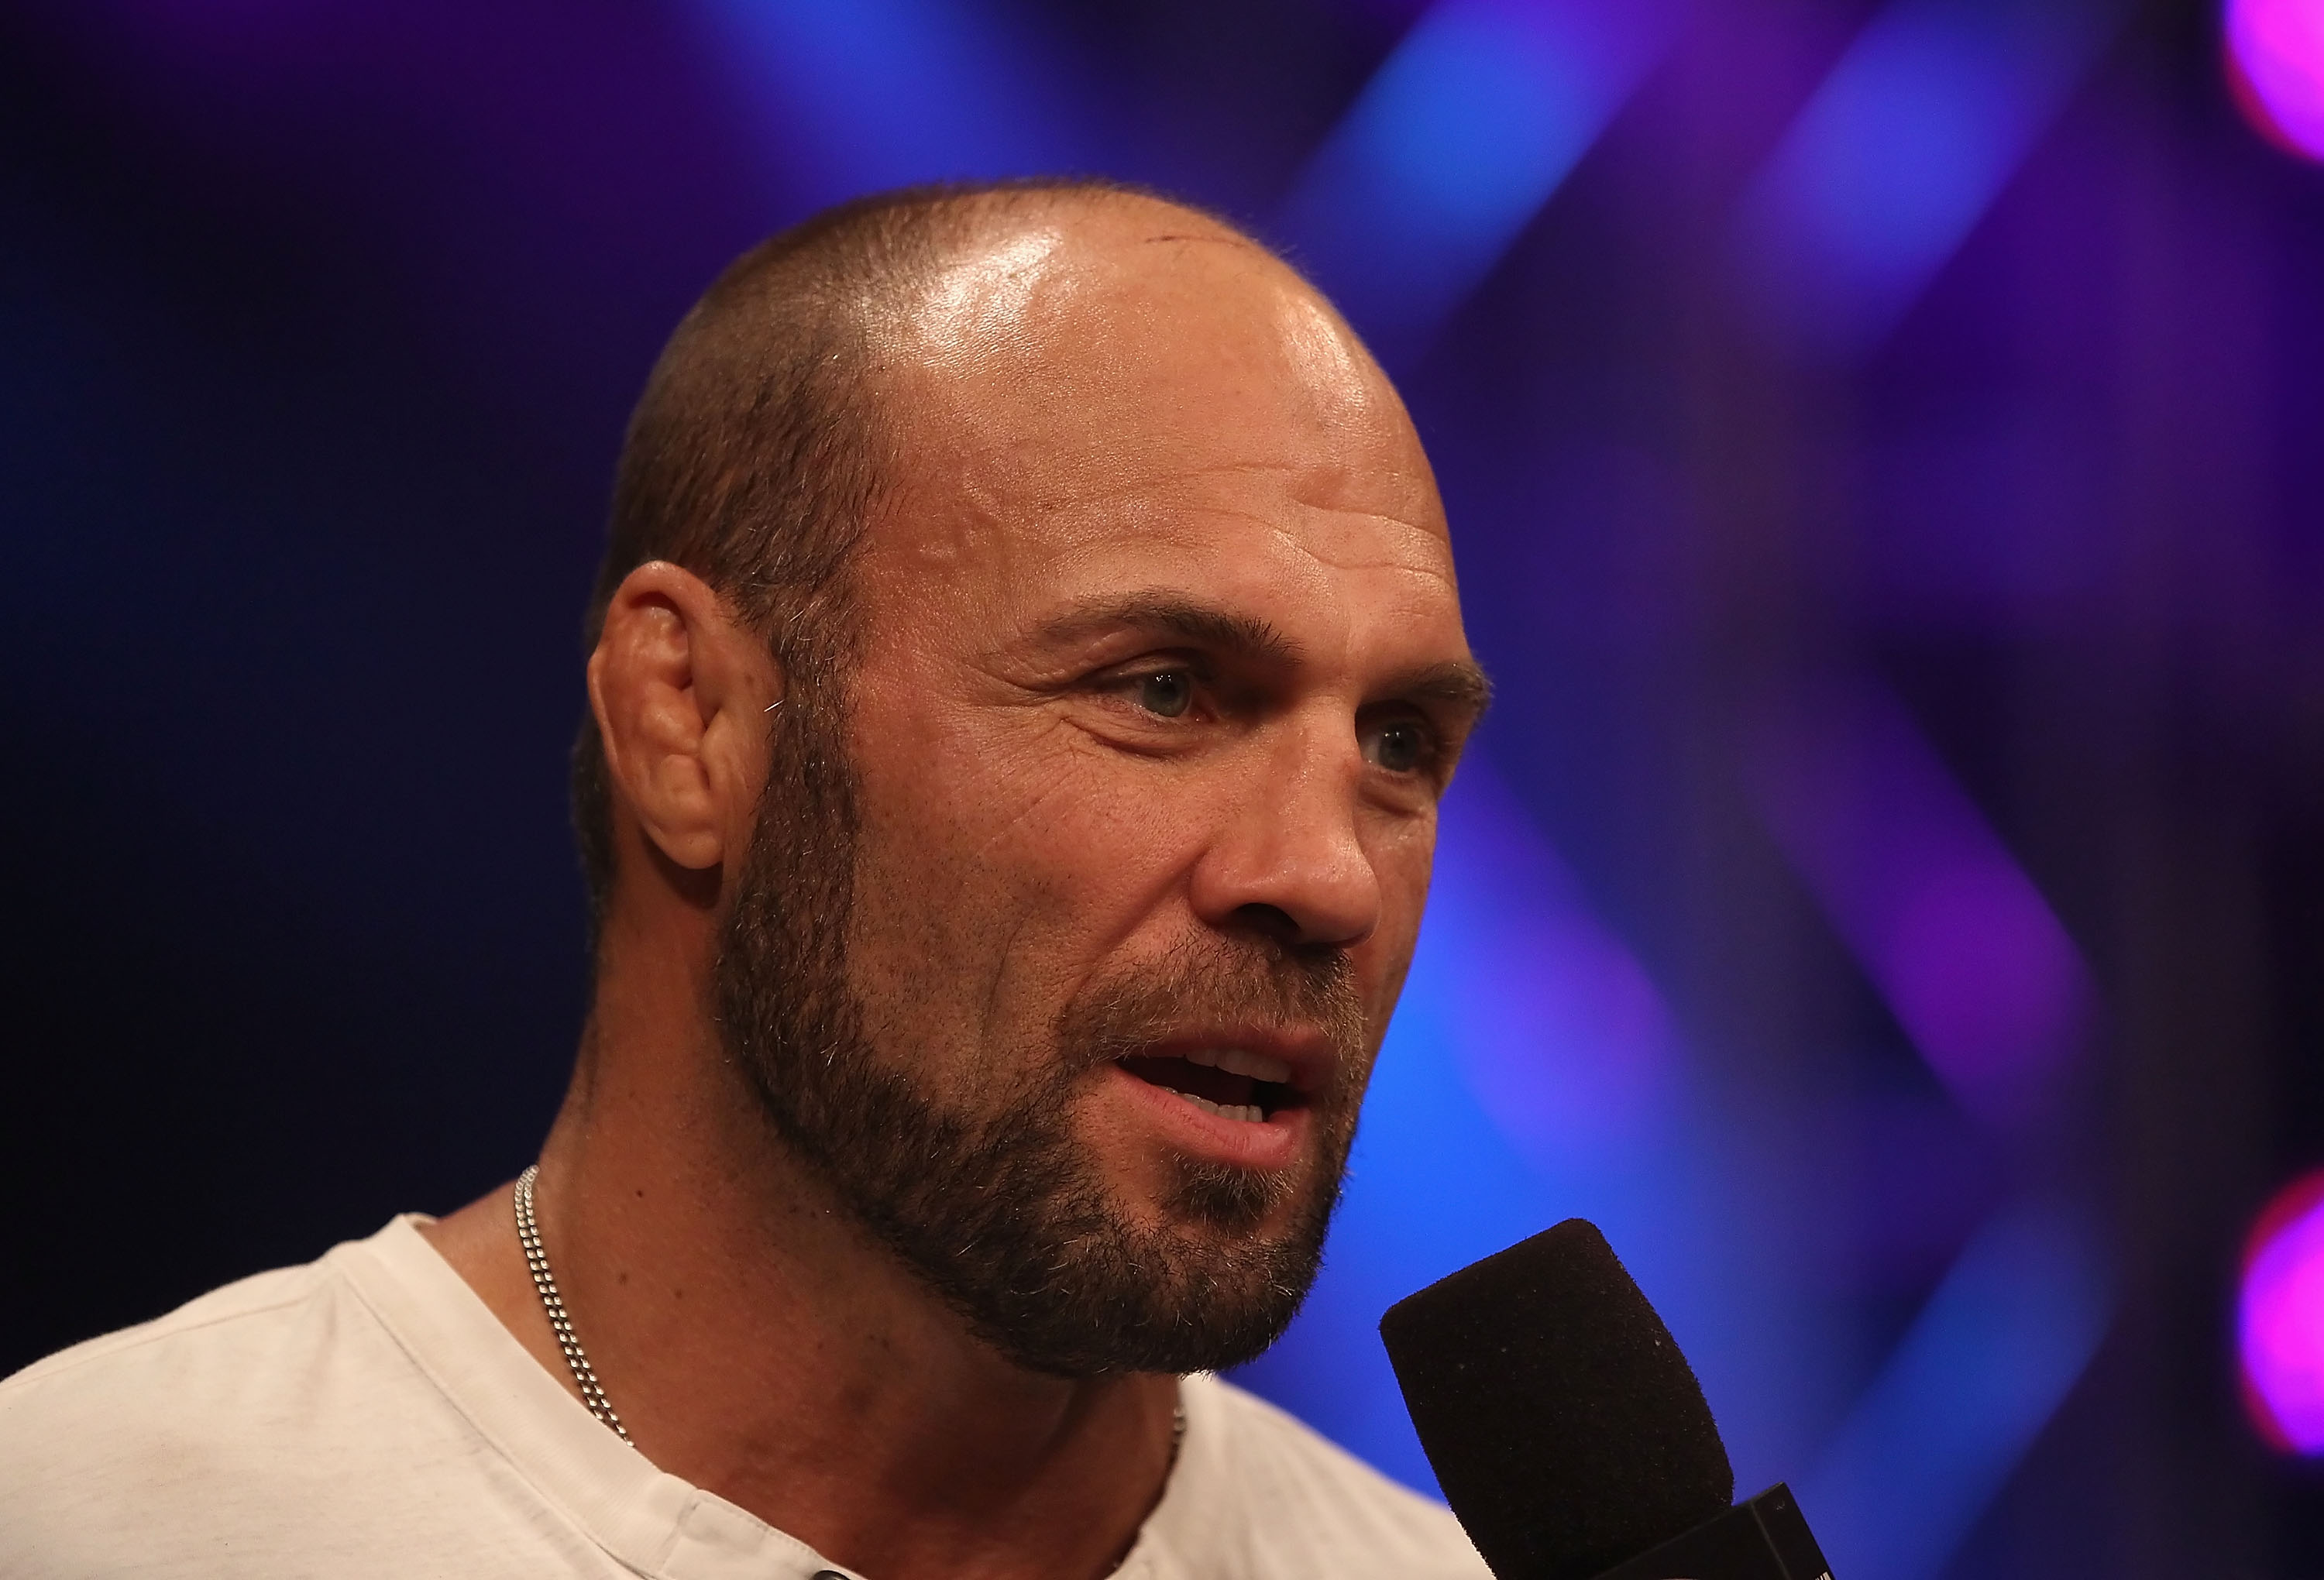 PHOENIX - AUGUST 13:  Randy Couture speaks with the media during the Strikeforce Challengers Main Card bout at Dodge Theater on August 13, 2010 in Phoenix, Arizona.  (Photo by Christian Petersen/Getty Images)